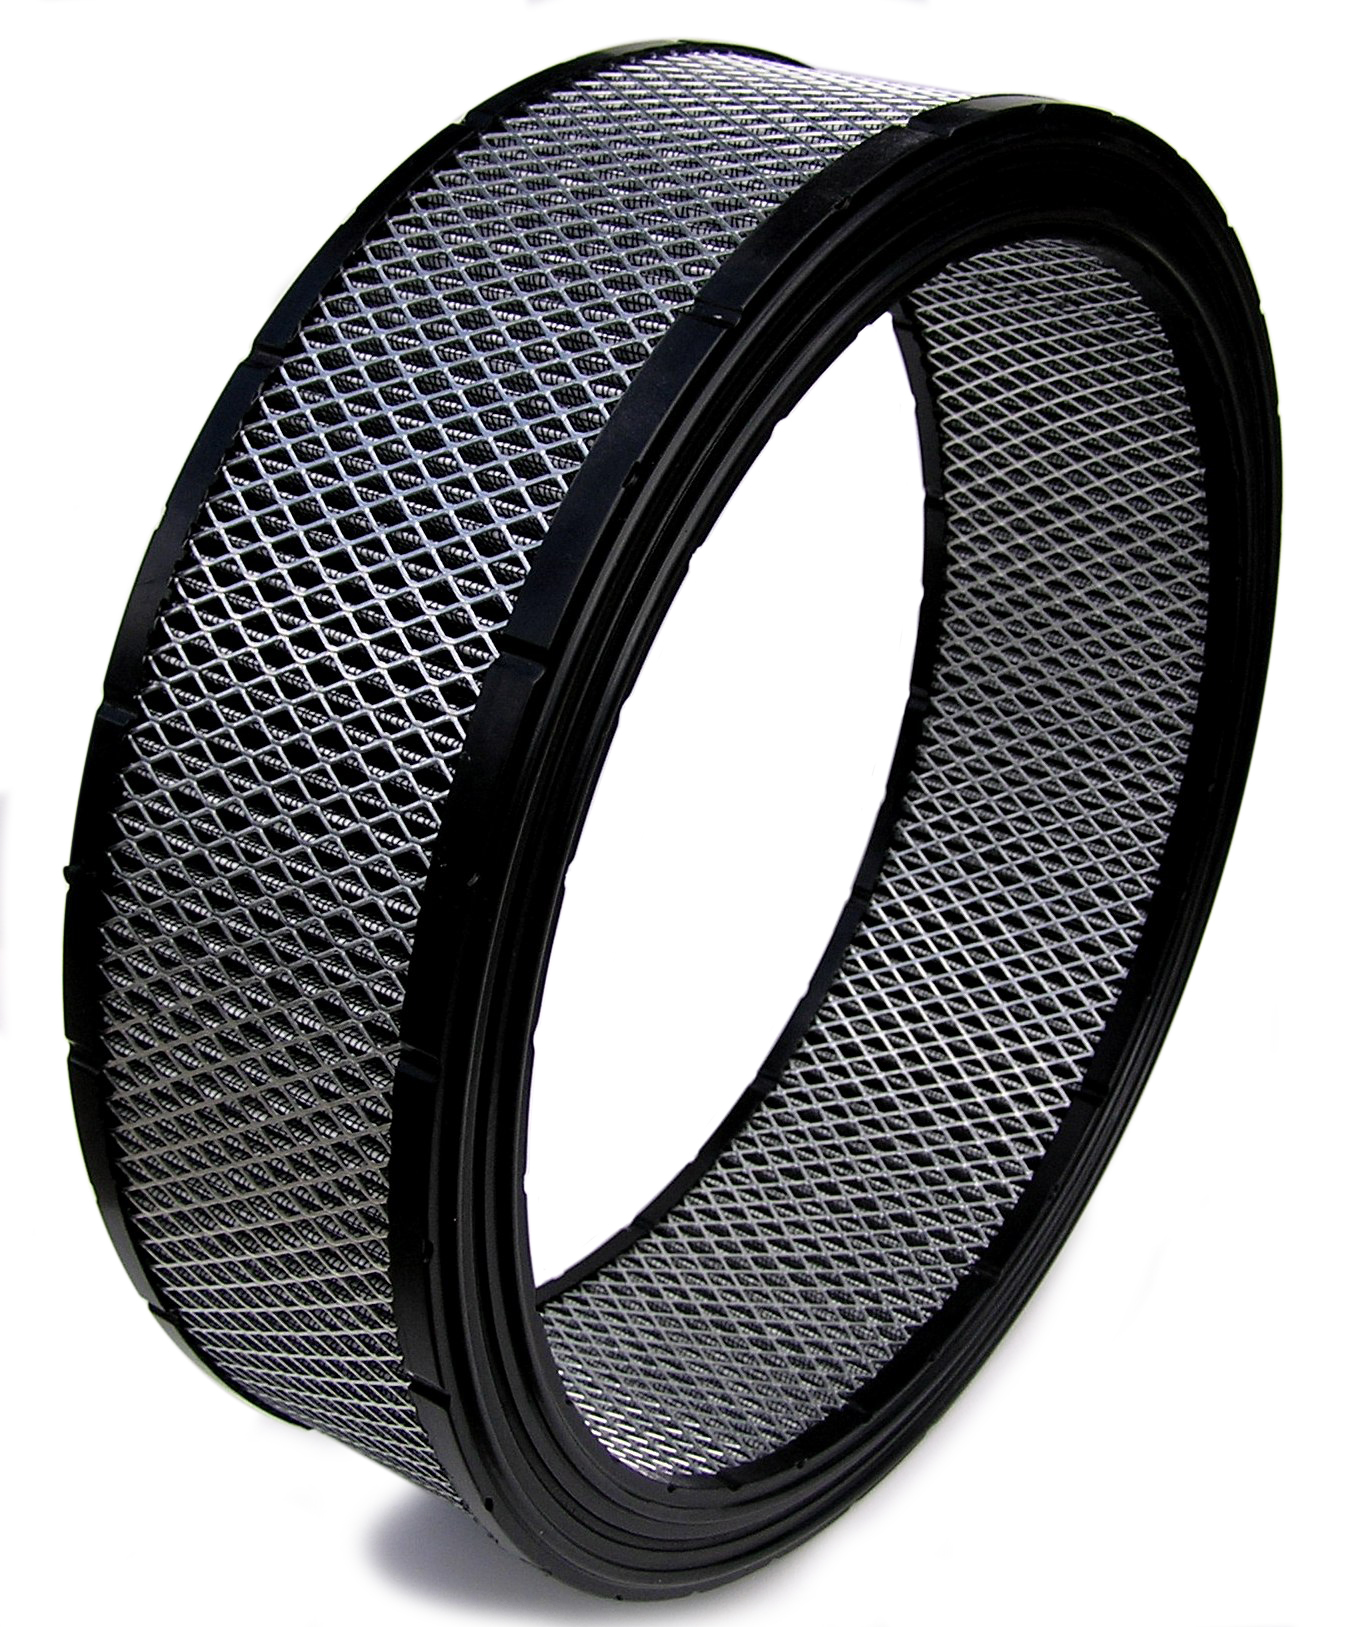 Spyder Filters SF1440 Air Filter Element, Dirt Racing / Off Road, 14 in Diameter, 4 in Tall, Reusable Cotton, Gray, Each